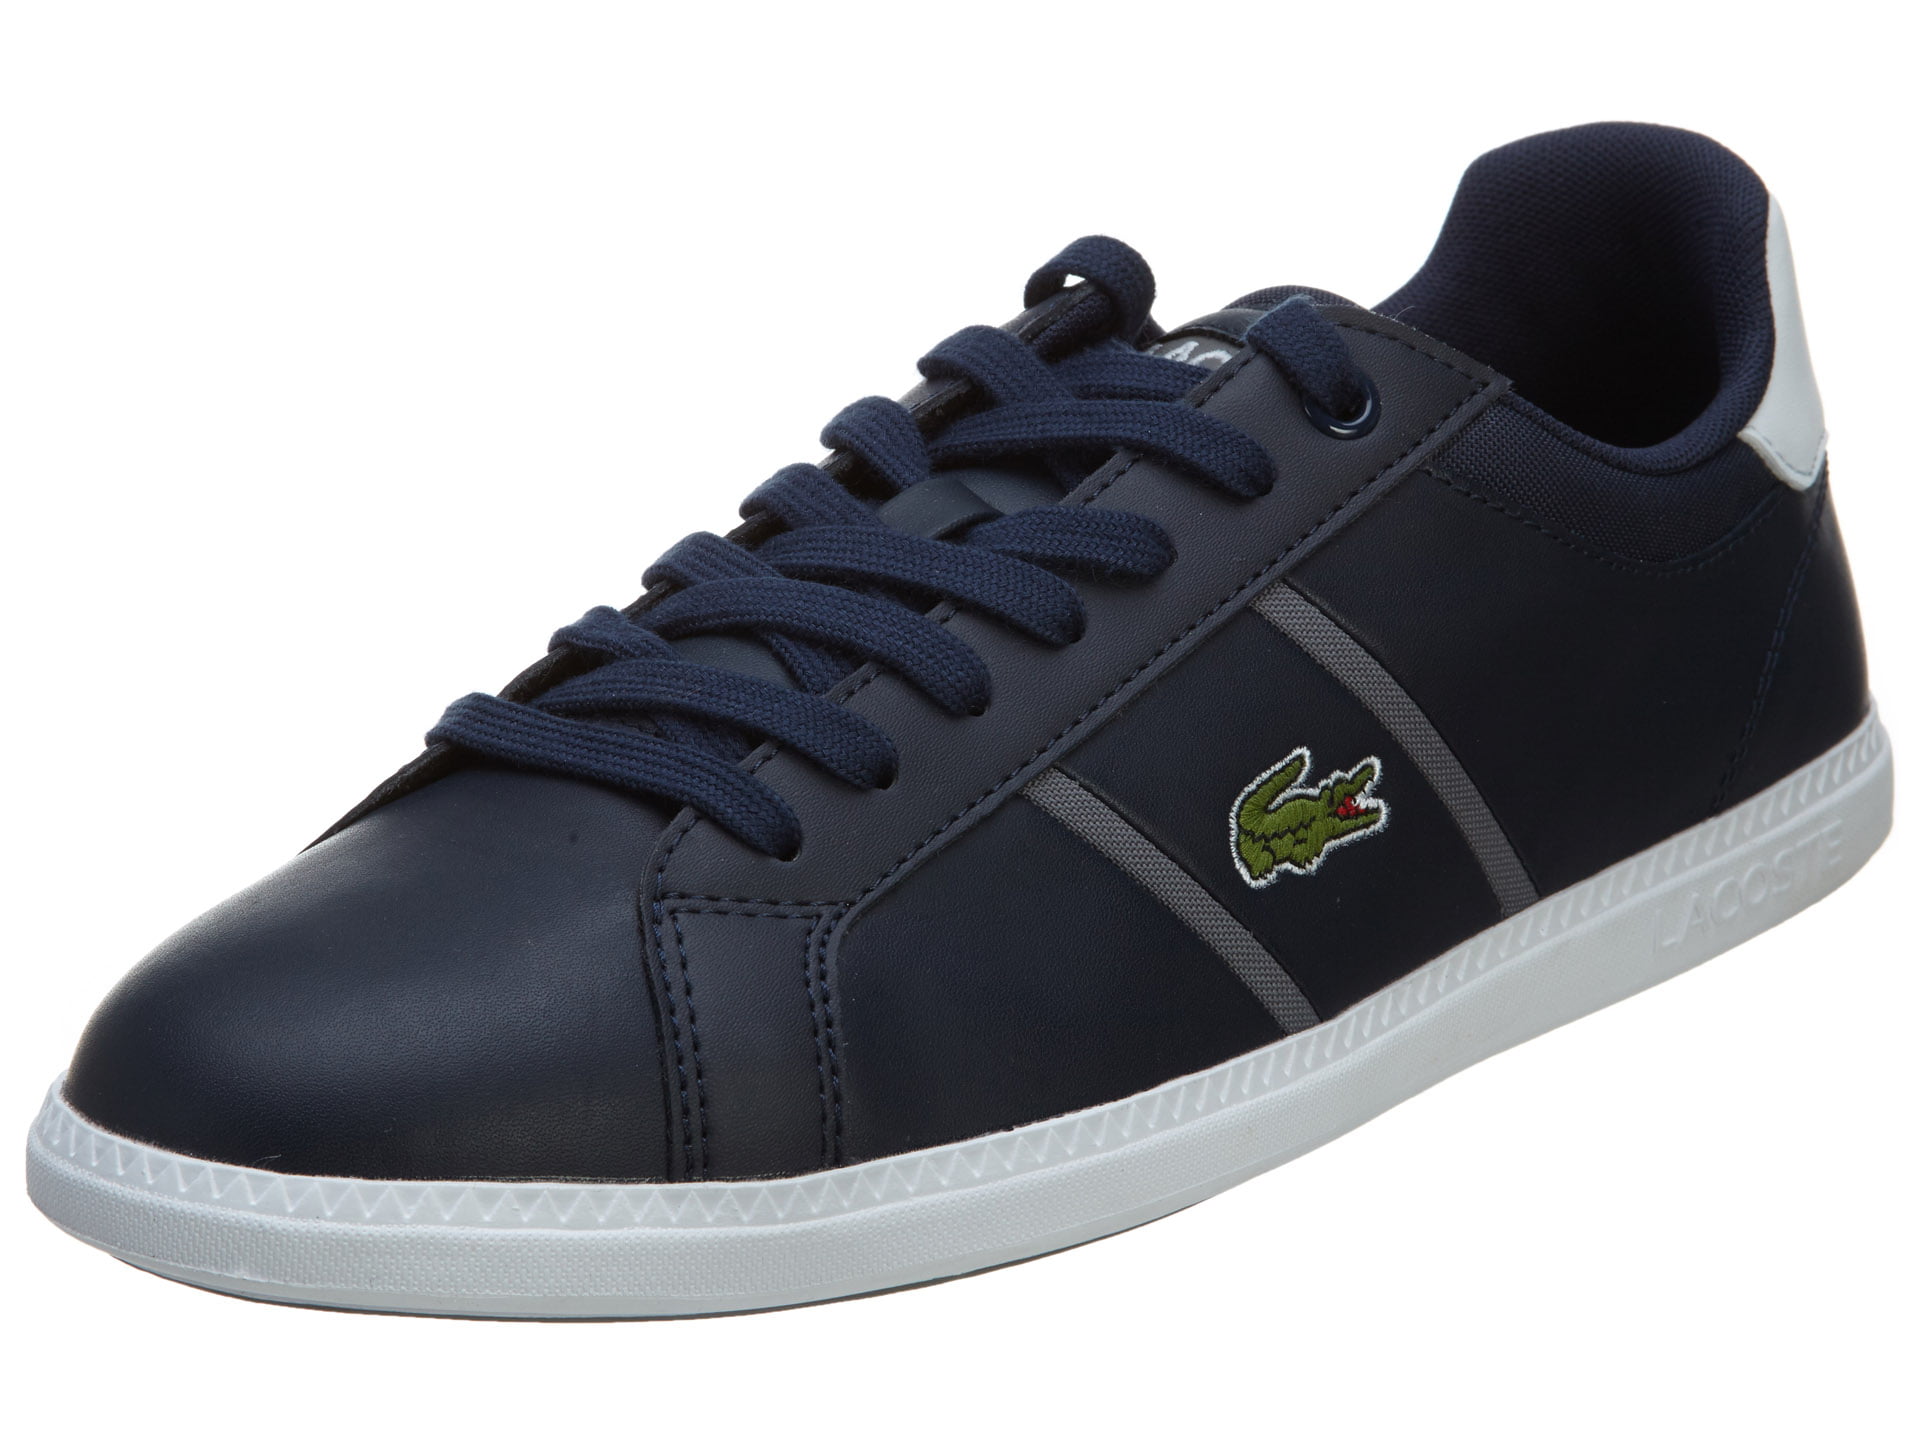 lacoste navy blue shoes